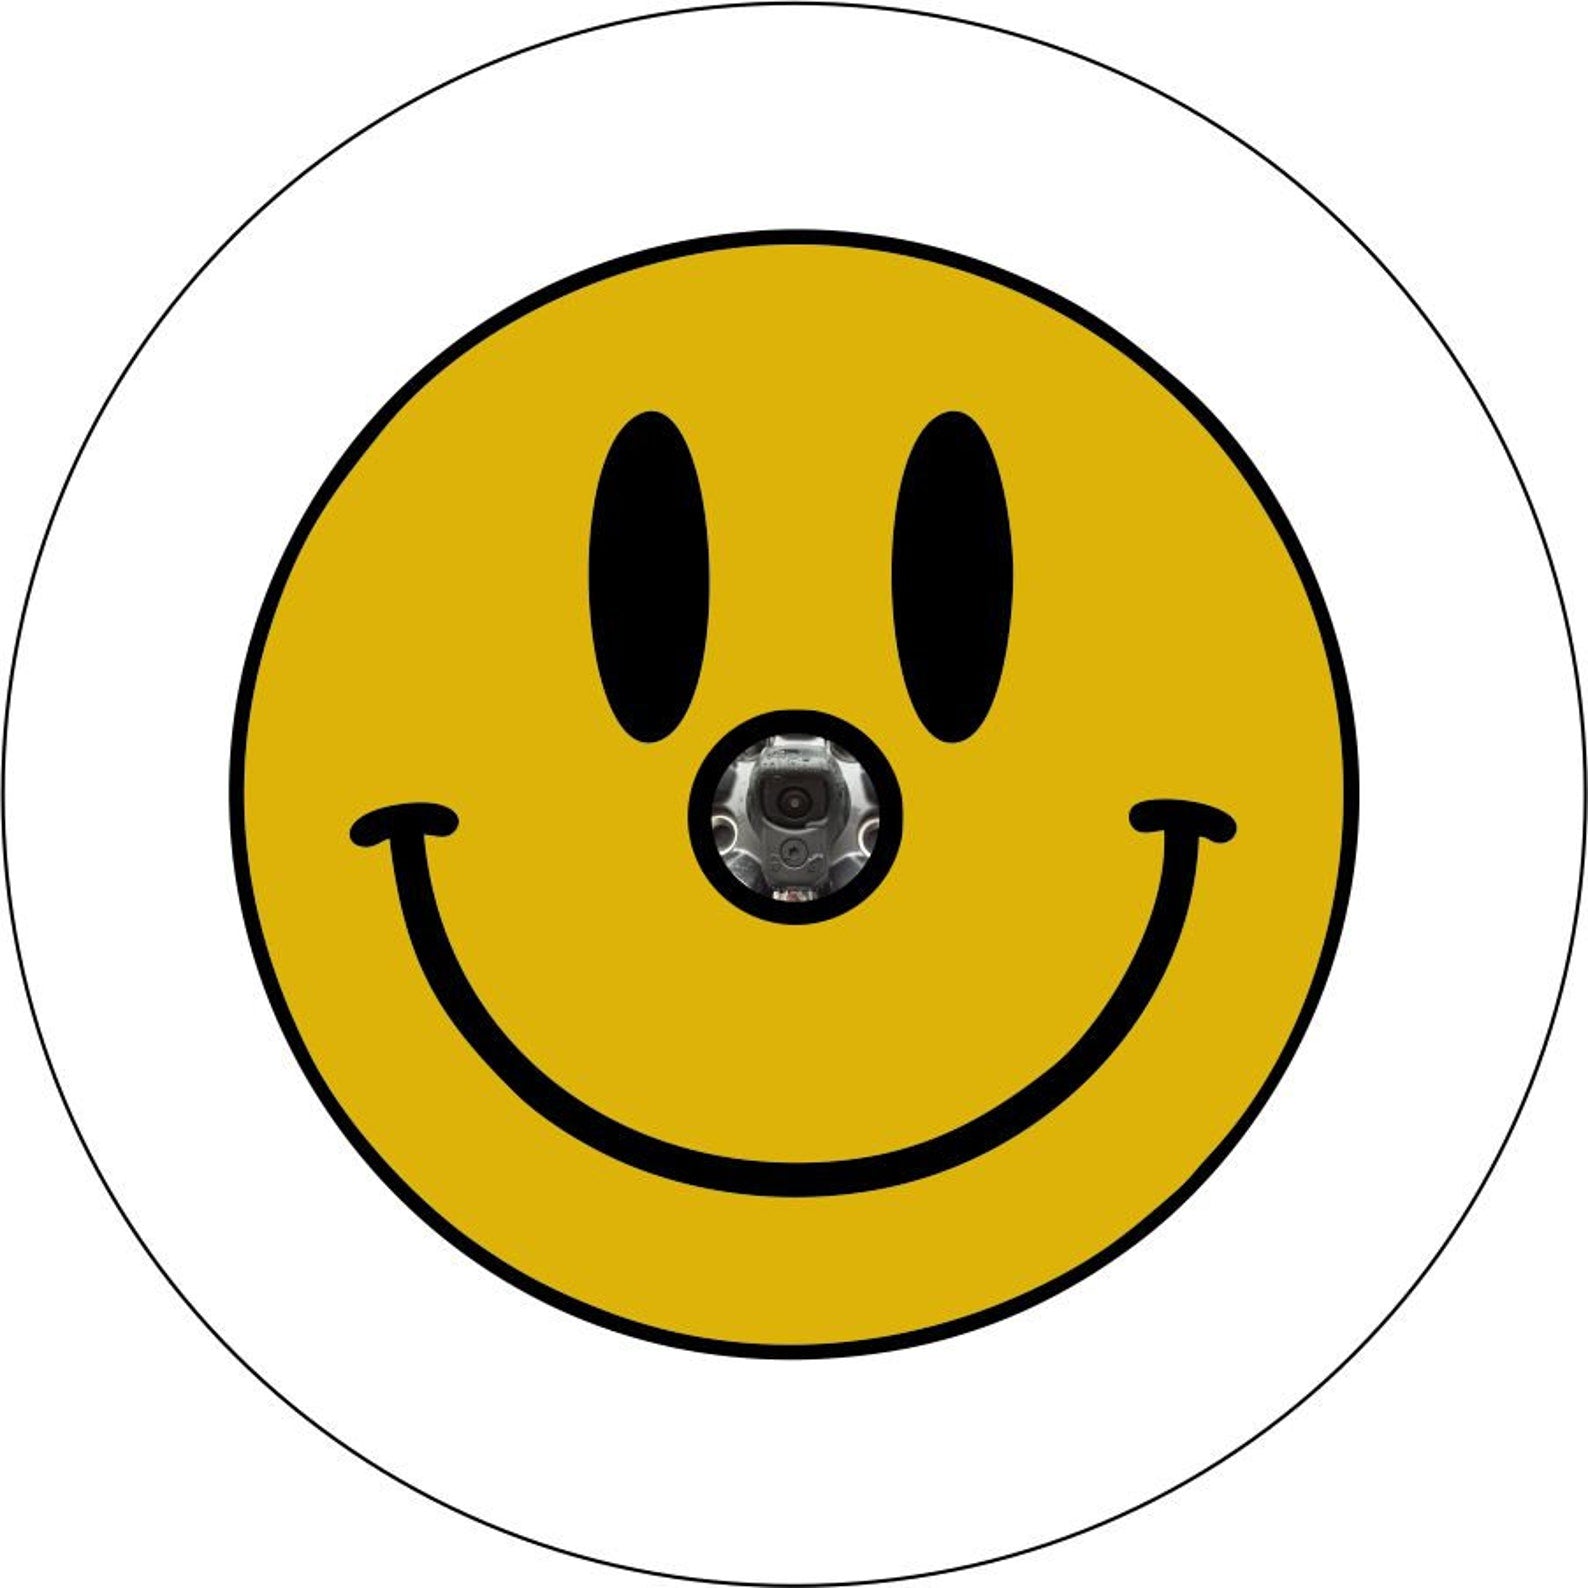 White vinyl spare tire cover with a basic yellow smiley face and a back up camera design.